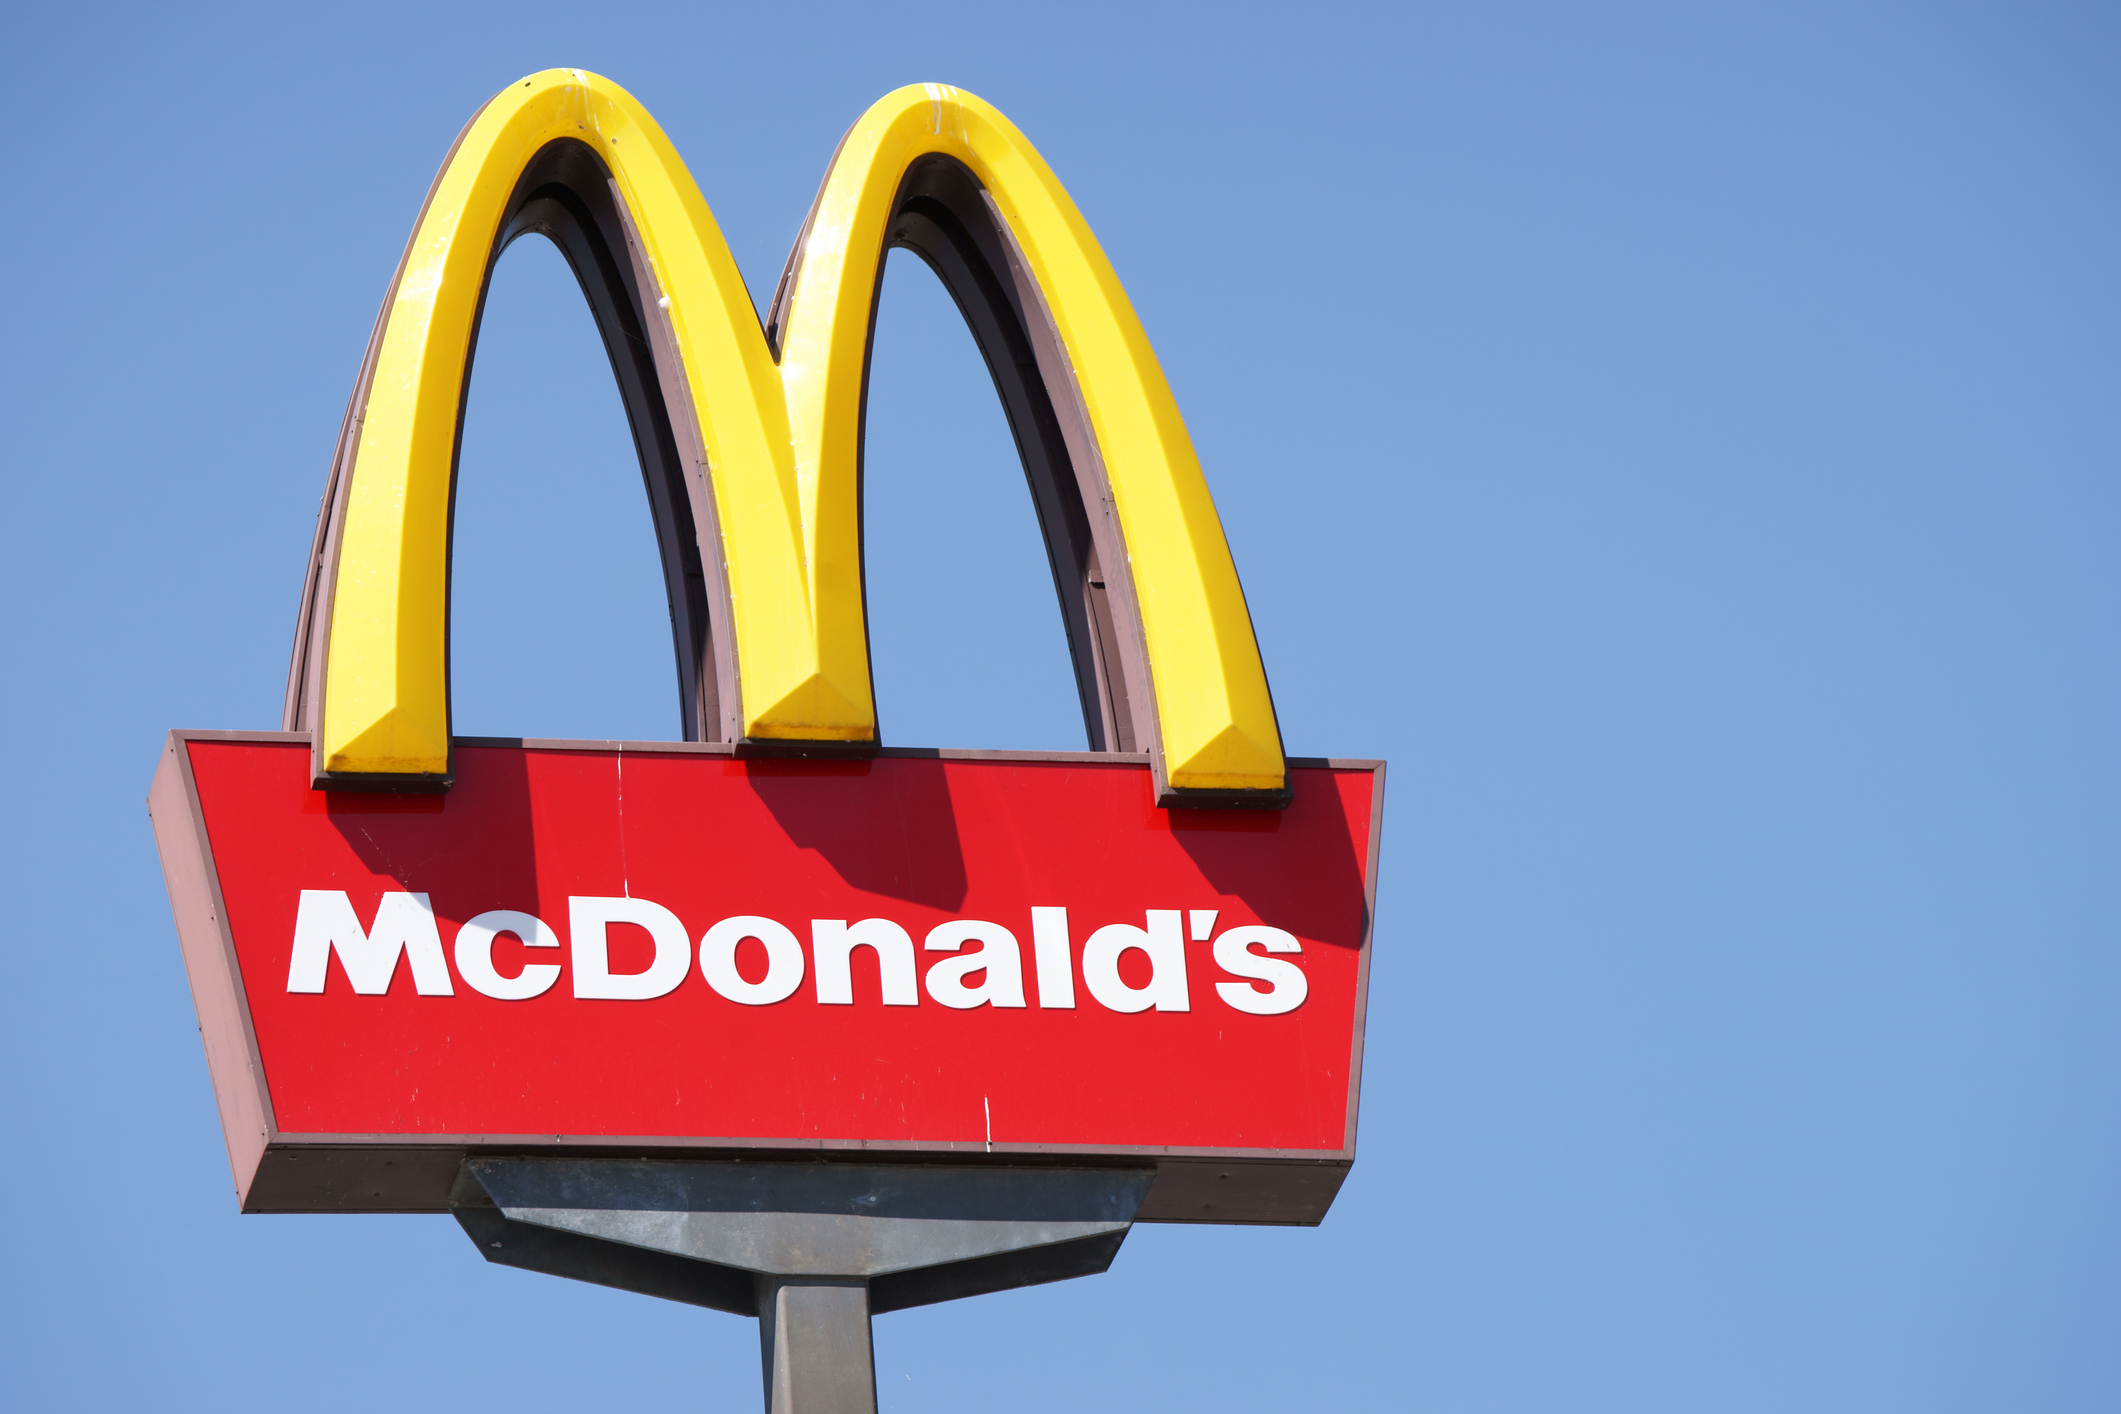 Is McDonald’s open on New Year’s Day 2022?